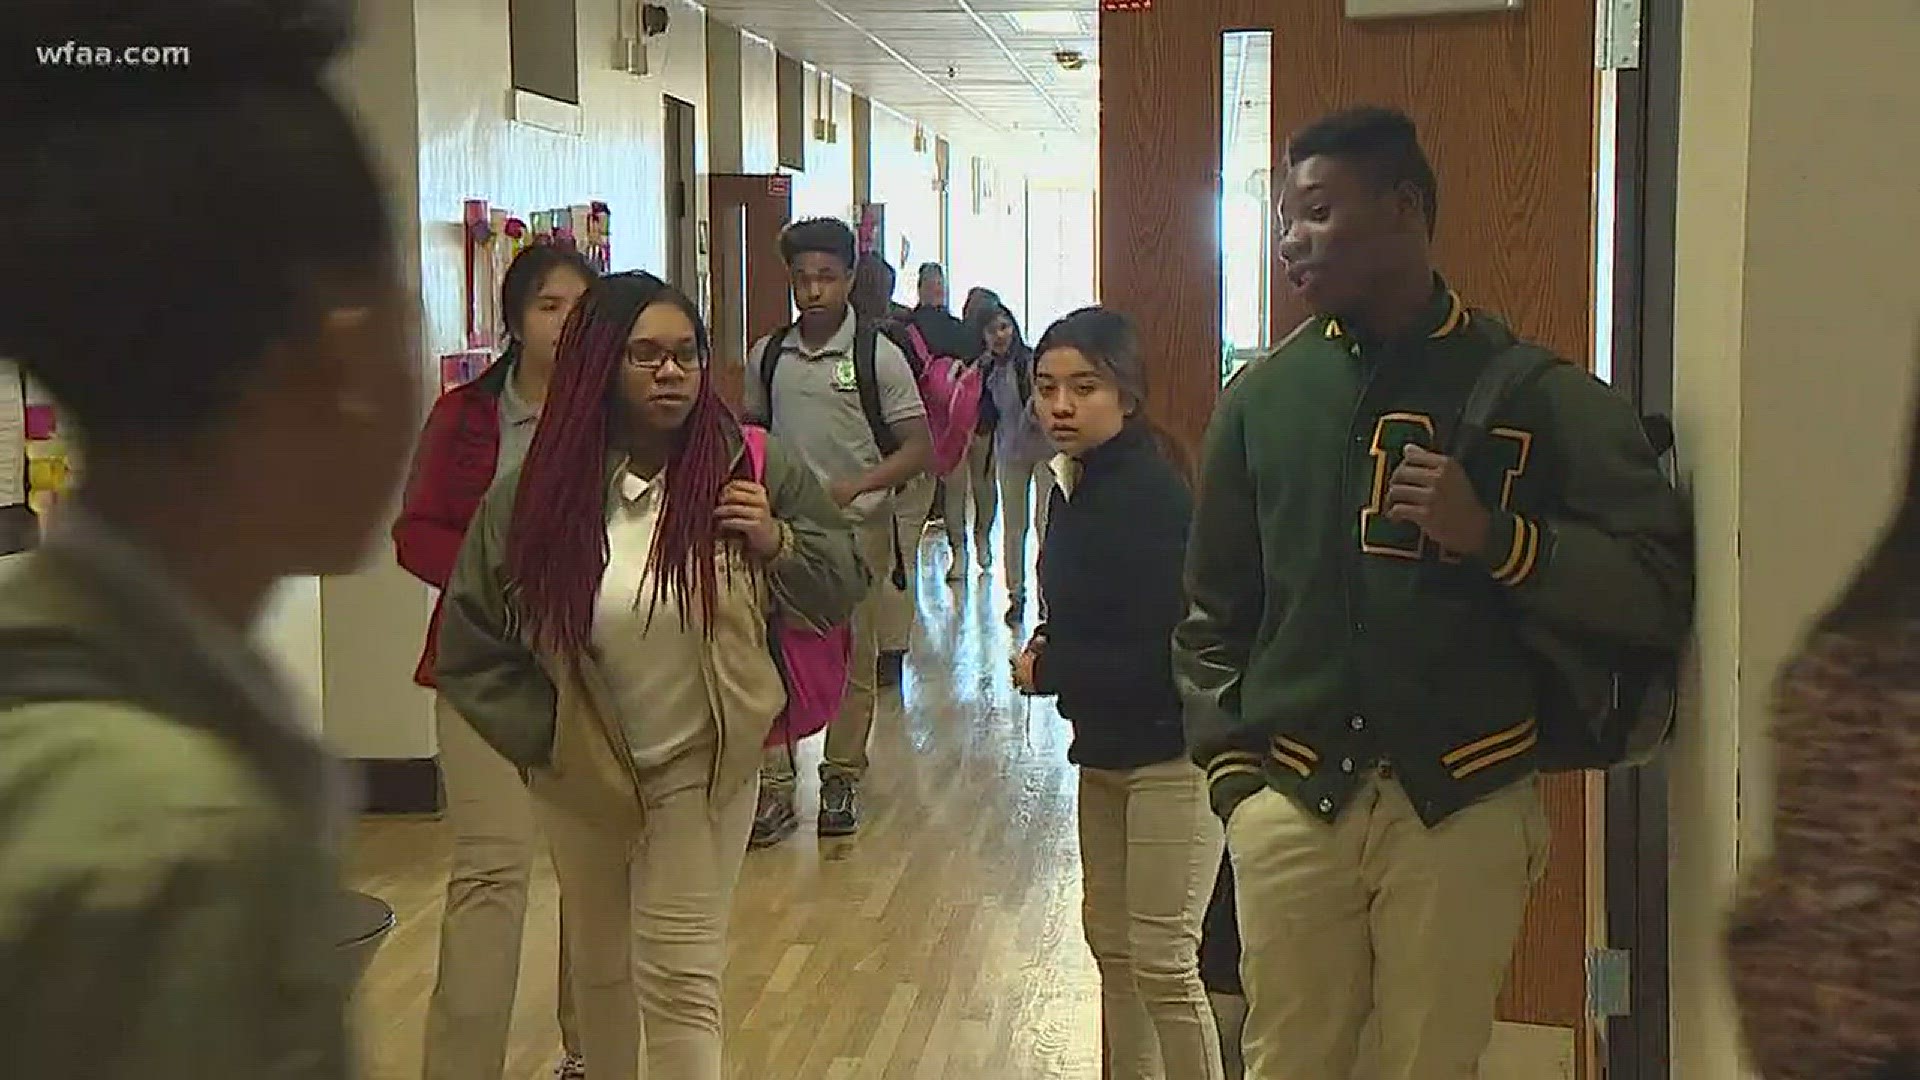 The Dallas ISD Collegiate Academy offers students the chance to earn associate's degrees while in high school.